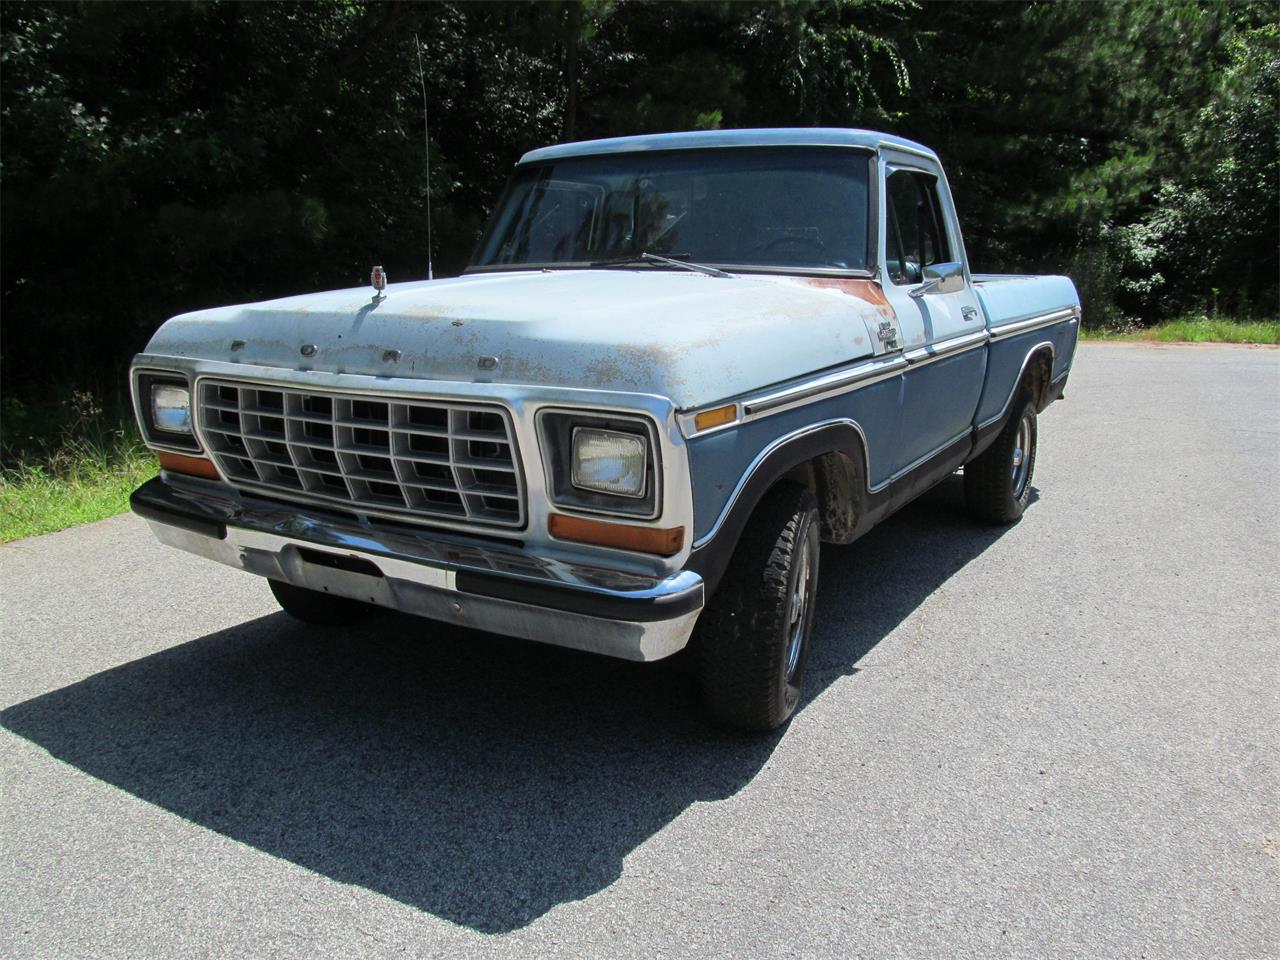 1979 ford f100 for sale classiccars com cc 1106686 1979 ford f100 for sale classiccars